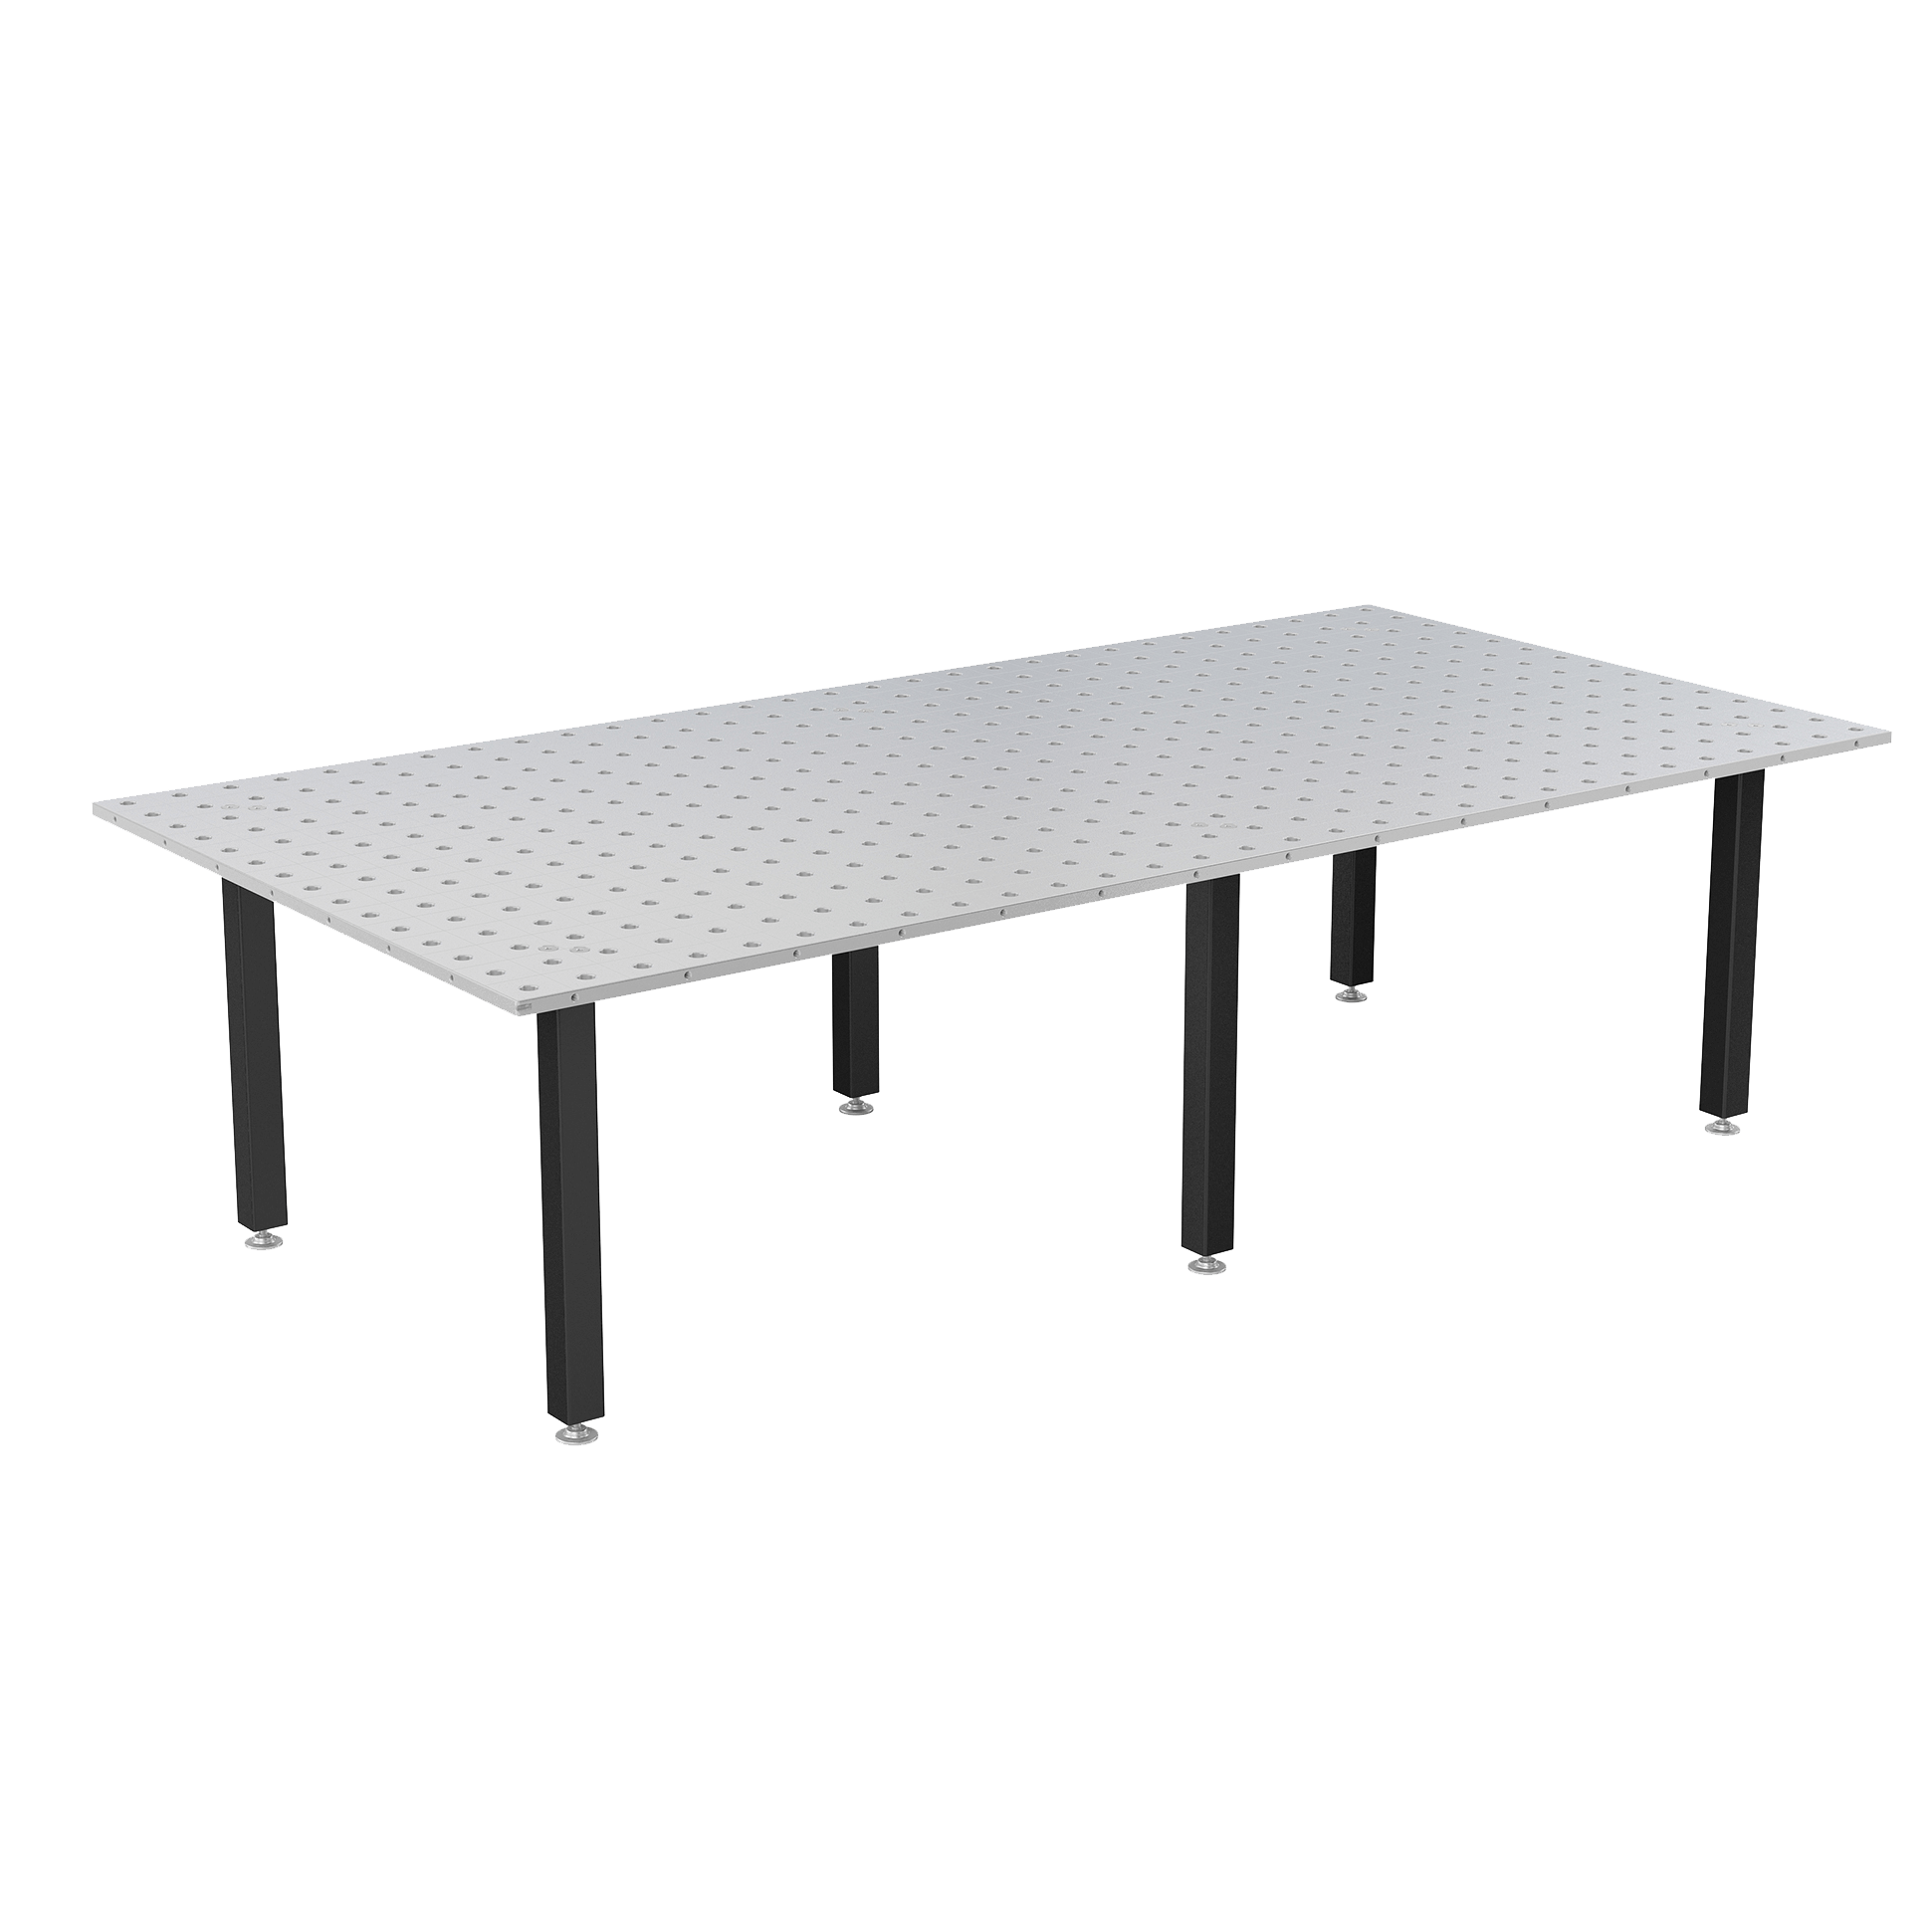 System 28 3000x1500mm (118"x59") Siegmund "BASIC" Welding Table (Item No. 4-281040) - Siegmund Welding Tables and Fixtures USA - A Division of Quantum Machinery Group